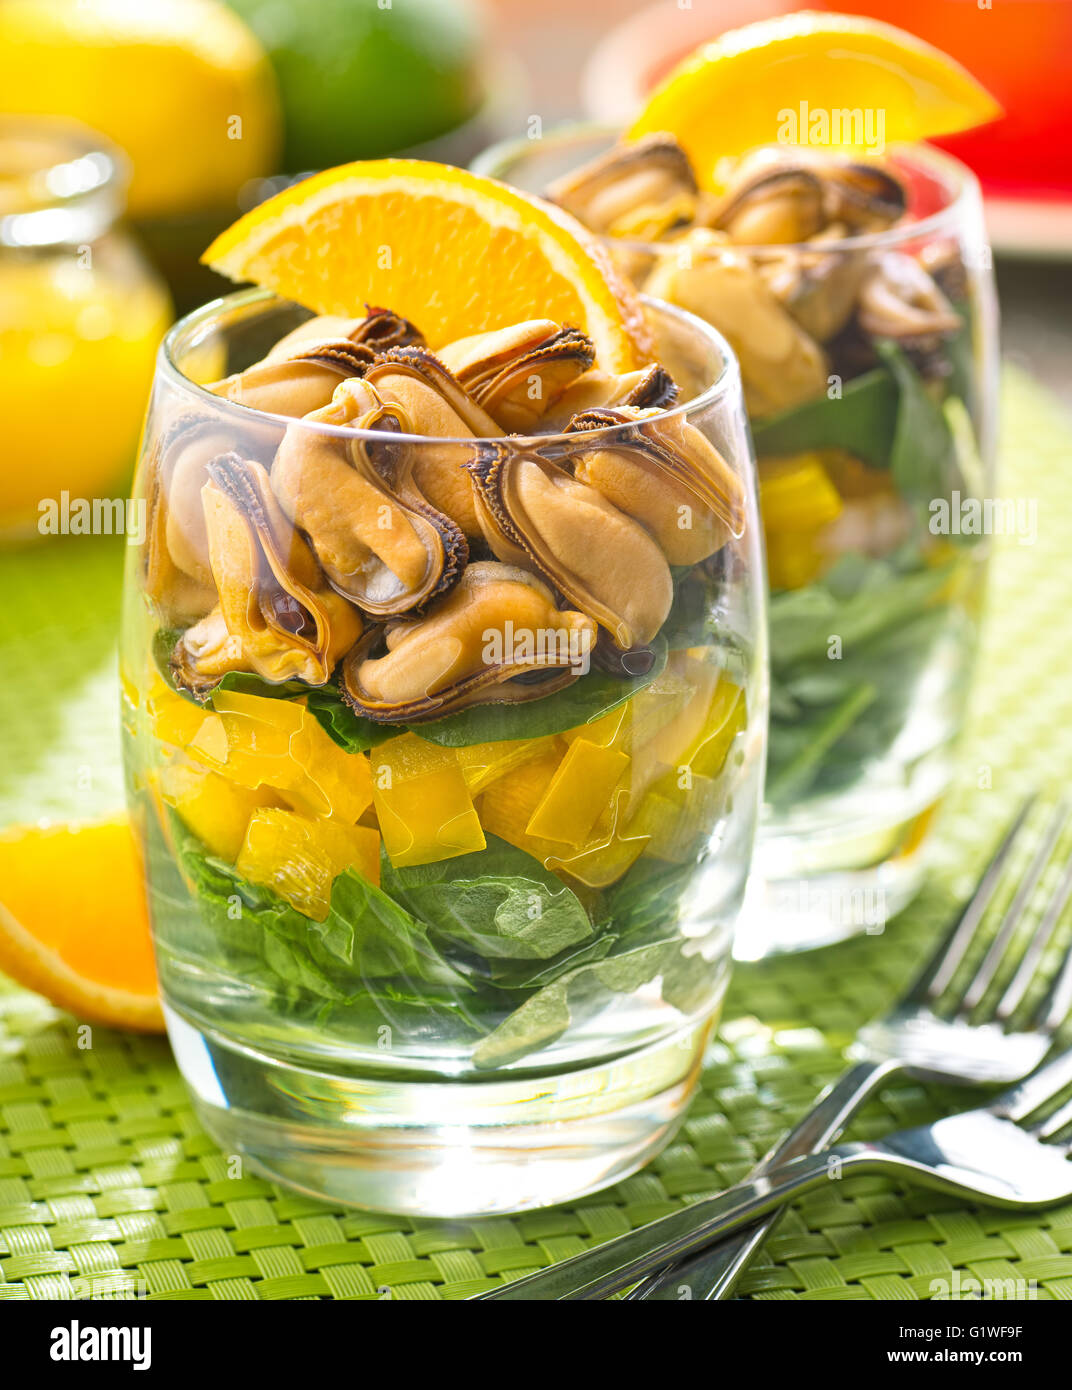 A delicious layered mussel salad with citrus vinaigrette. Stock Photo